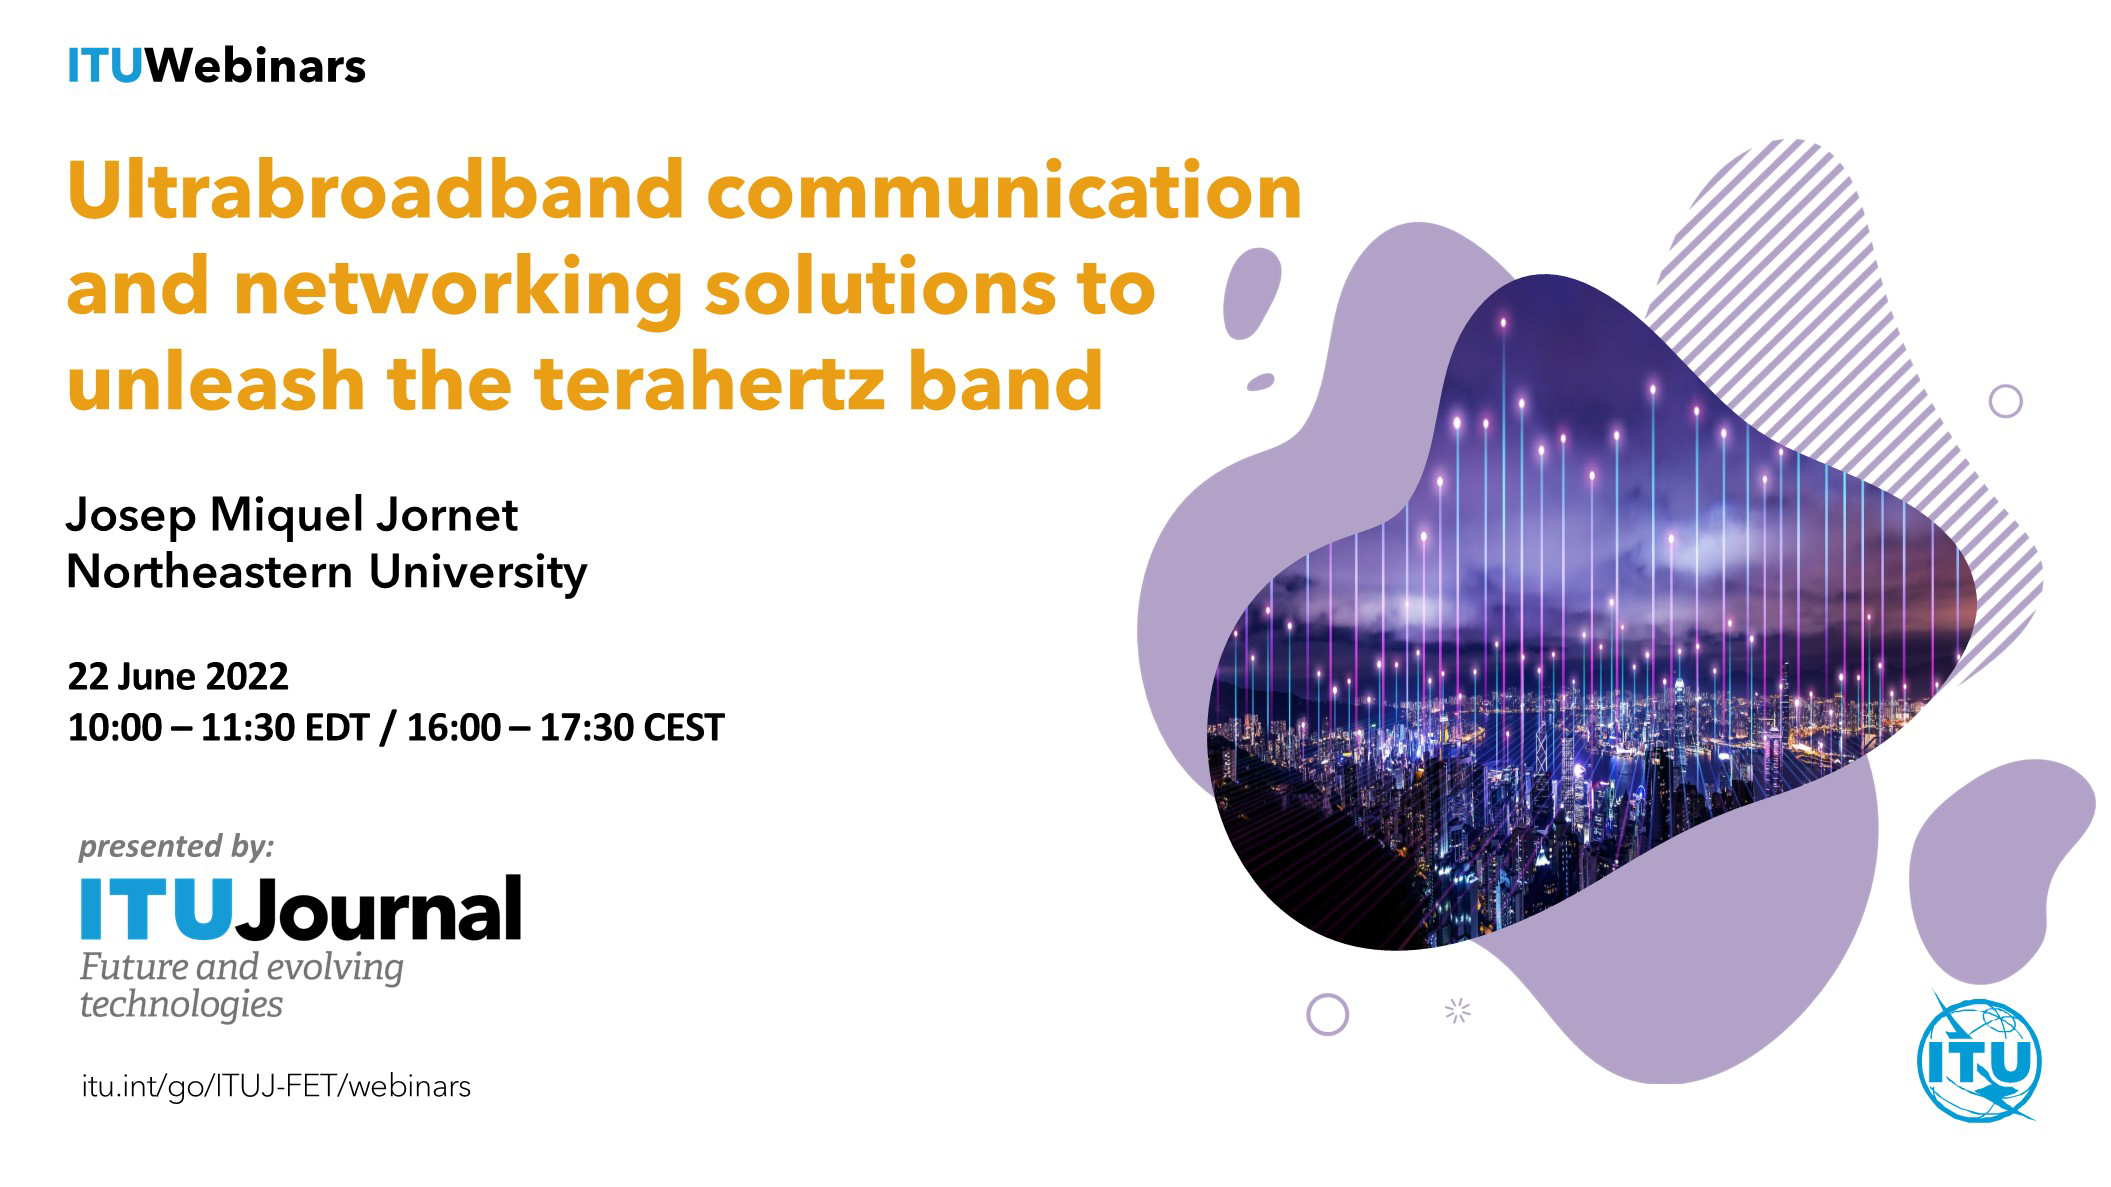 Ultrabroadband communication and networking solutions to unleash the terahertz band